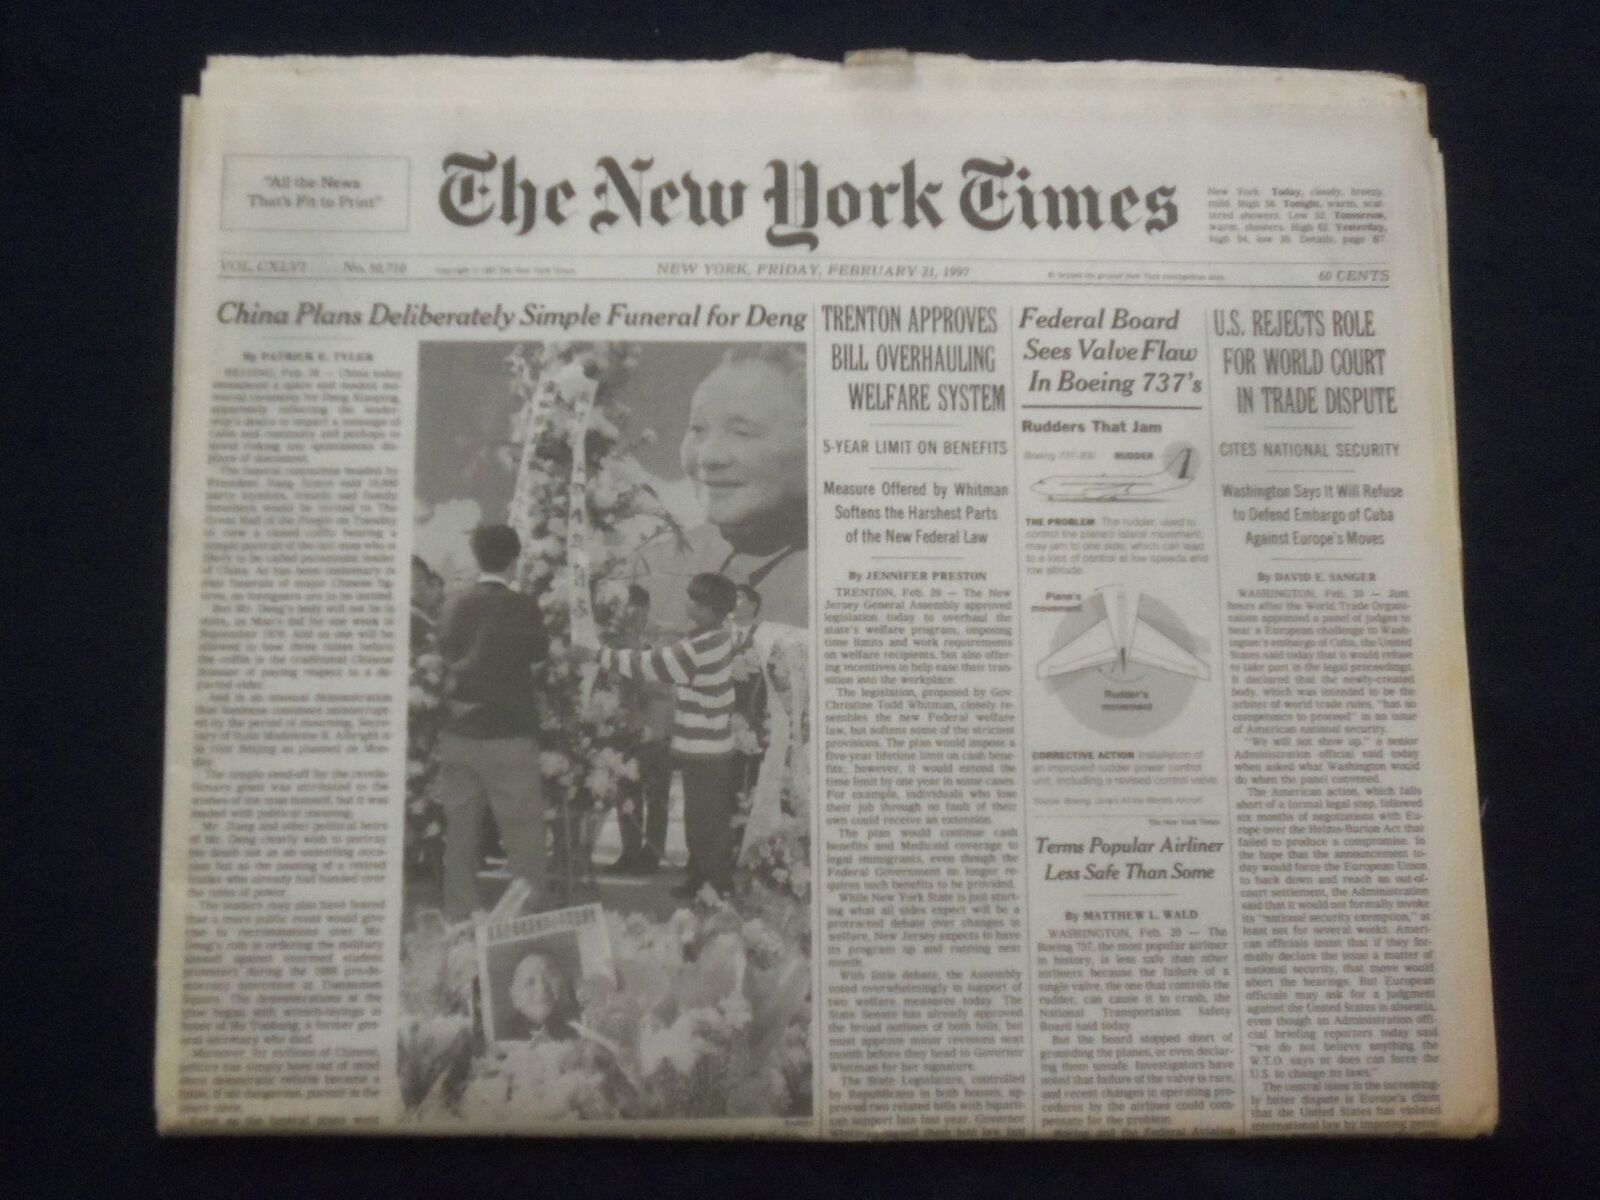 1997 FEB 21 NEW YORK TIMES NEWSPAPER -U.S. REJECTS ROLE FOR WORLD COURT- NP 7082